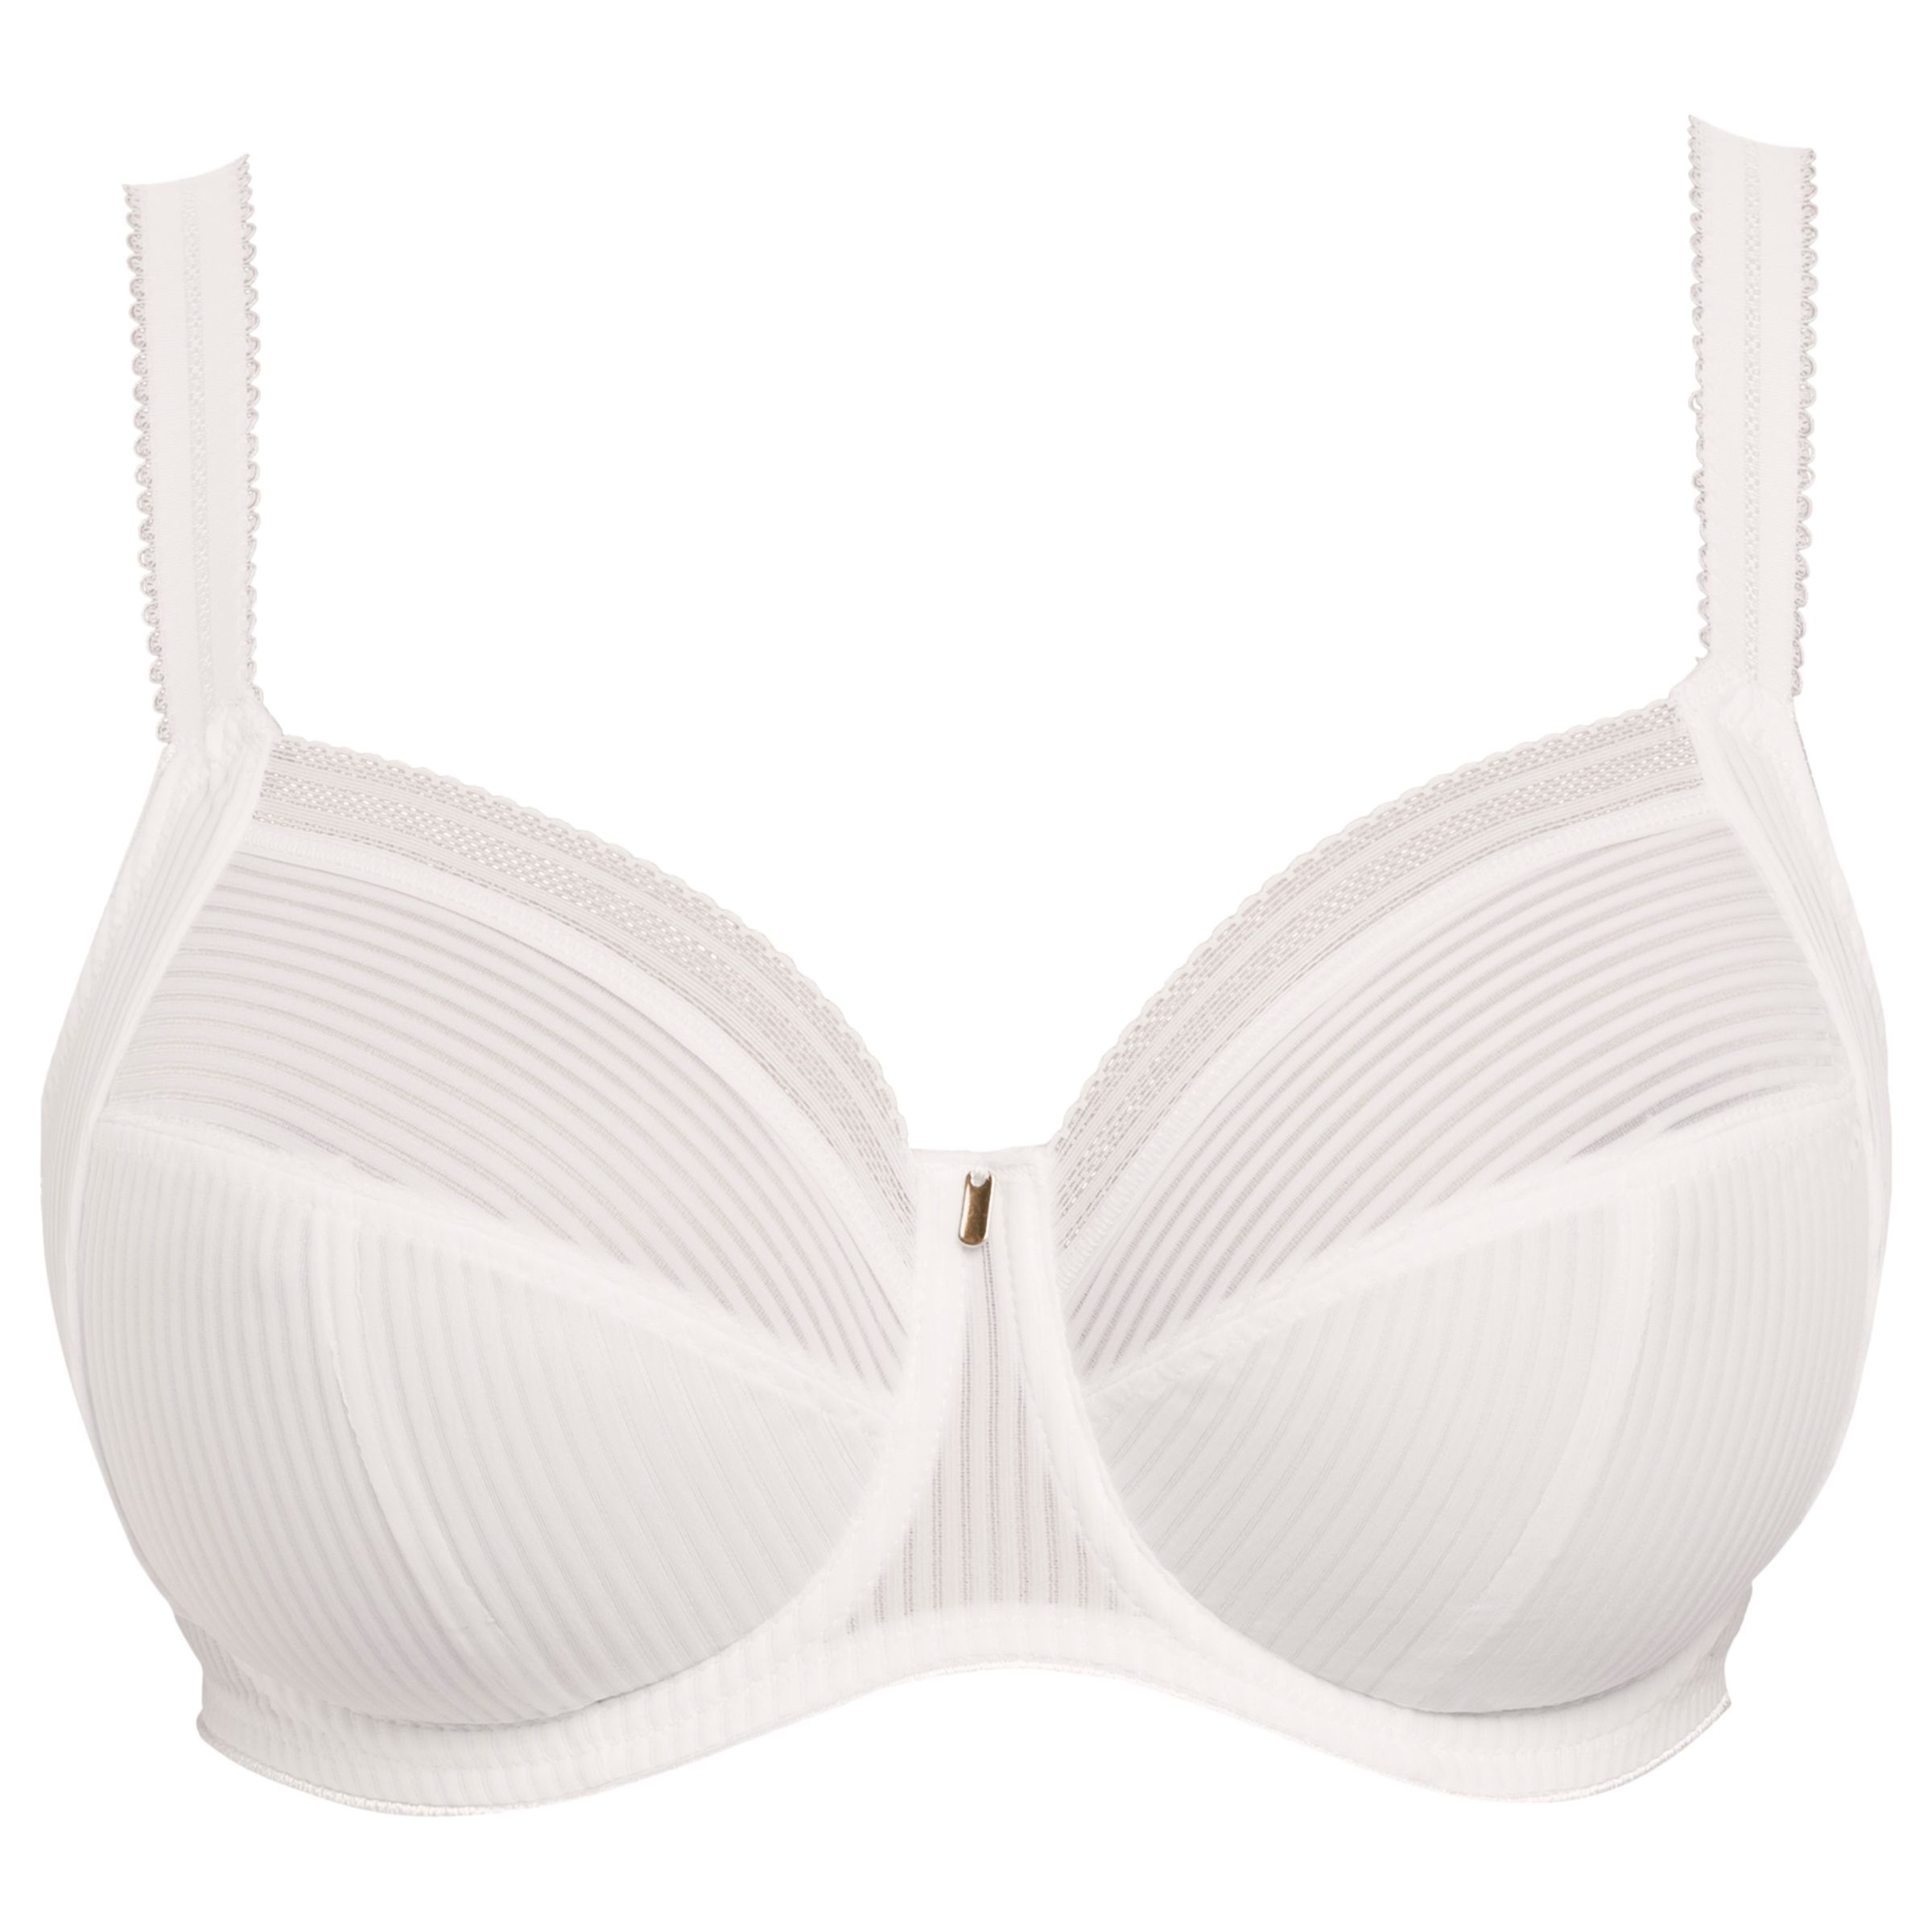 Fantasie Fusion Full Cup Side Support Bra: Coffee Roast : 34E